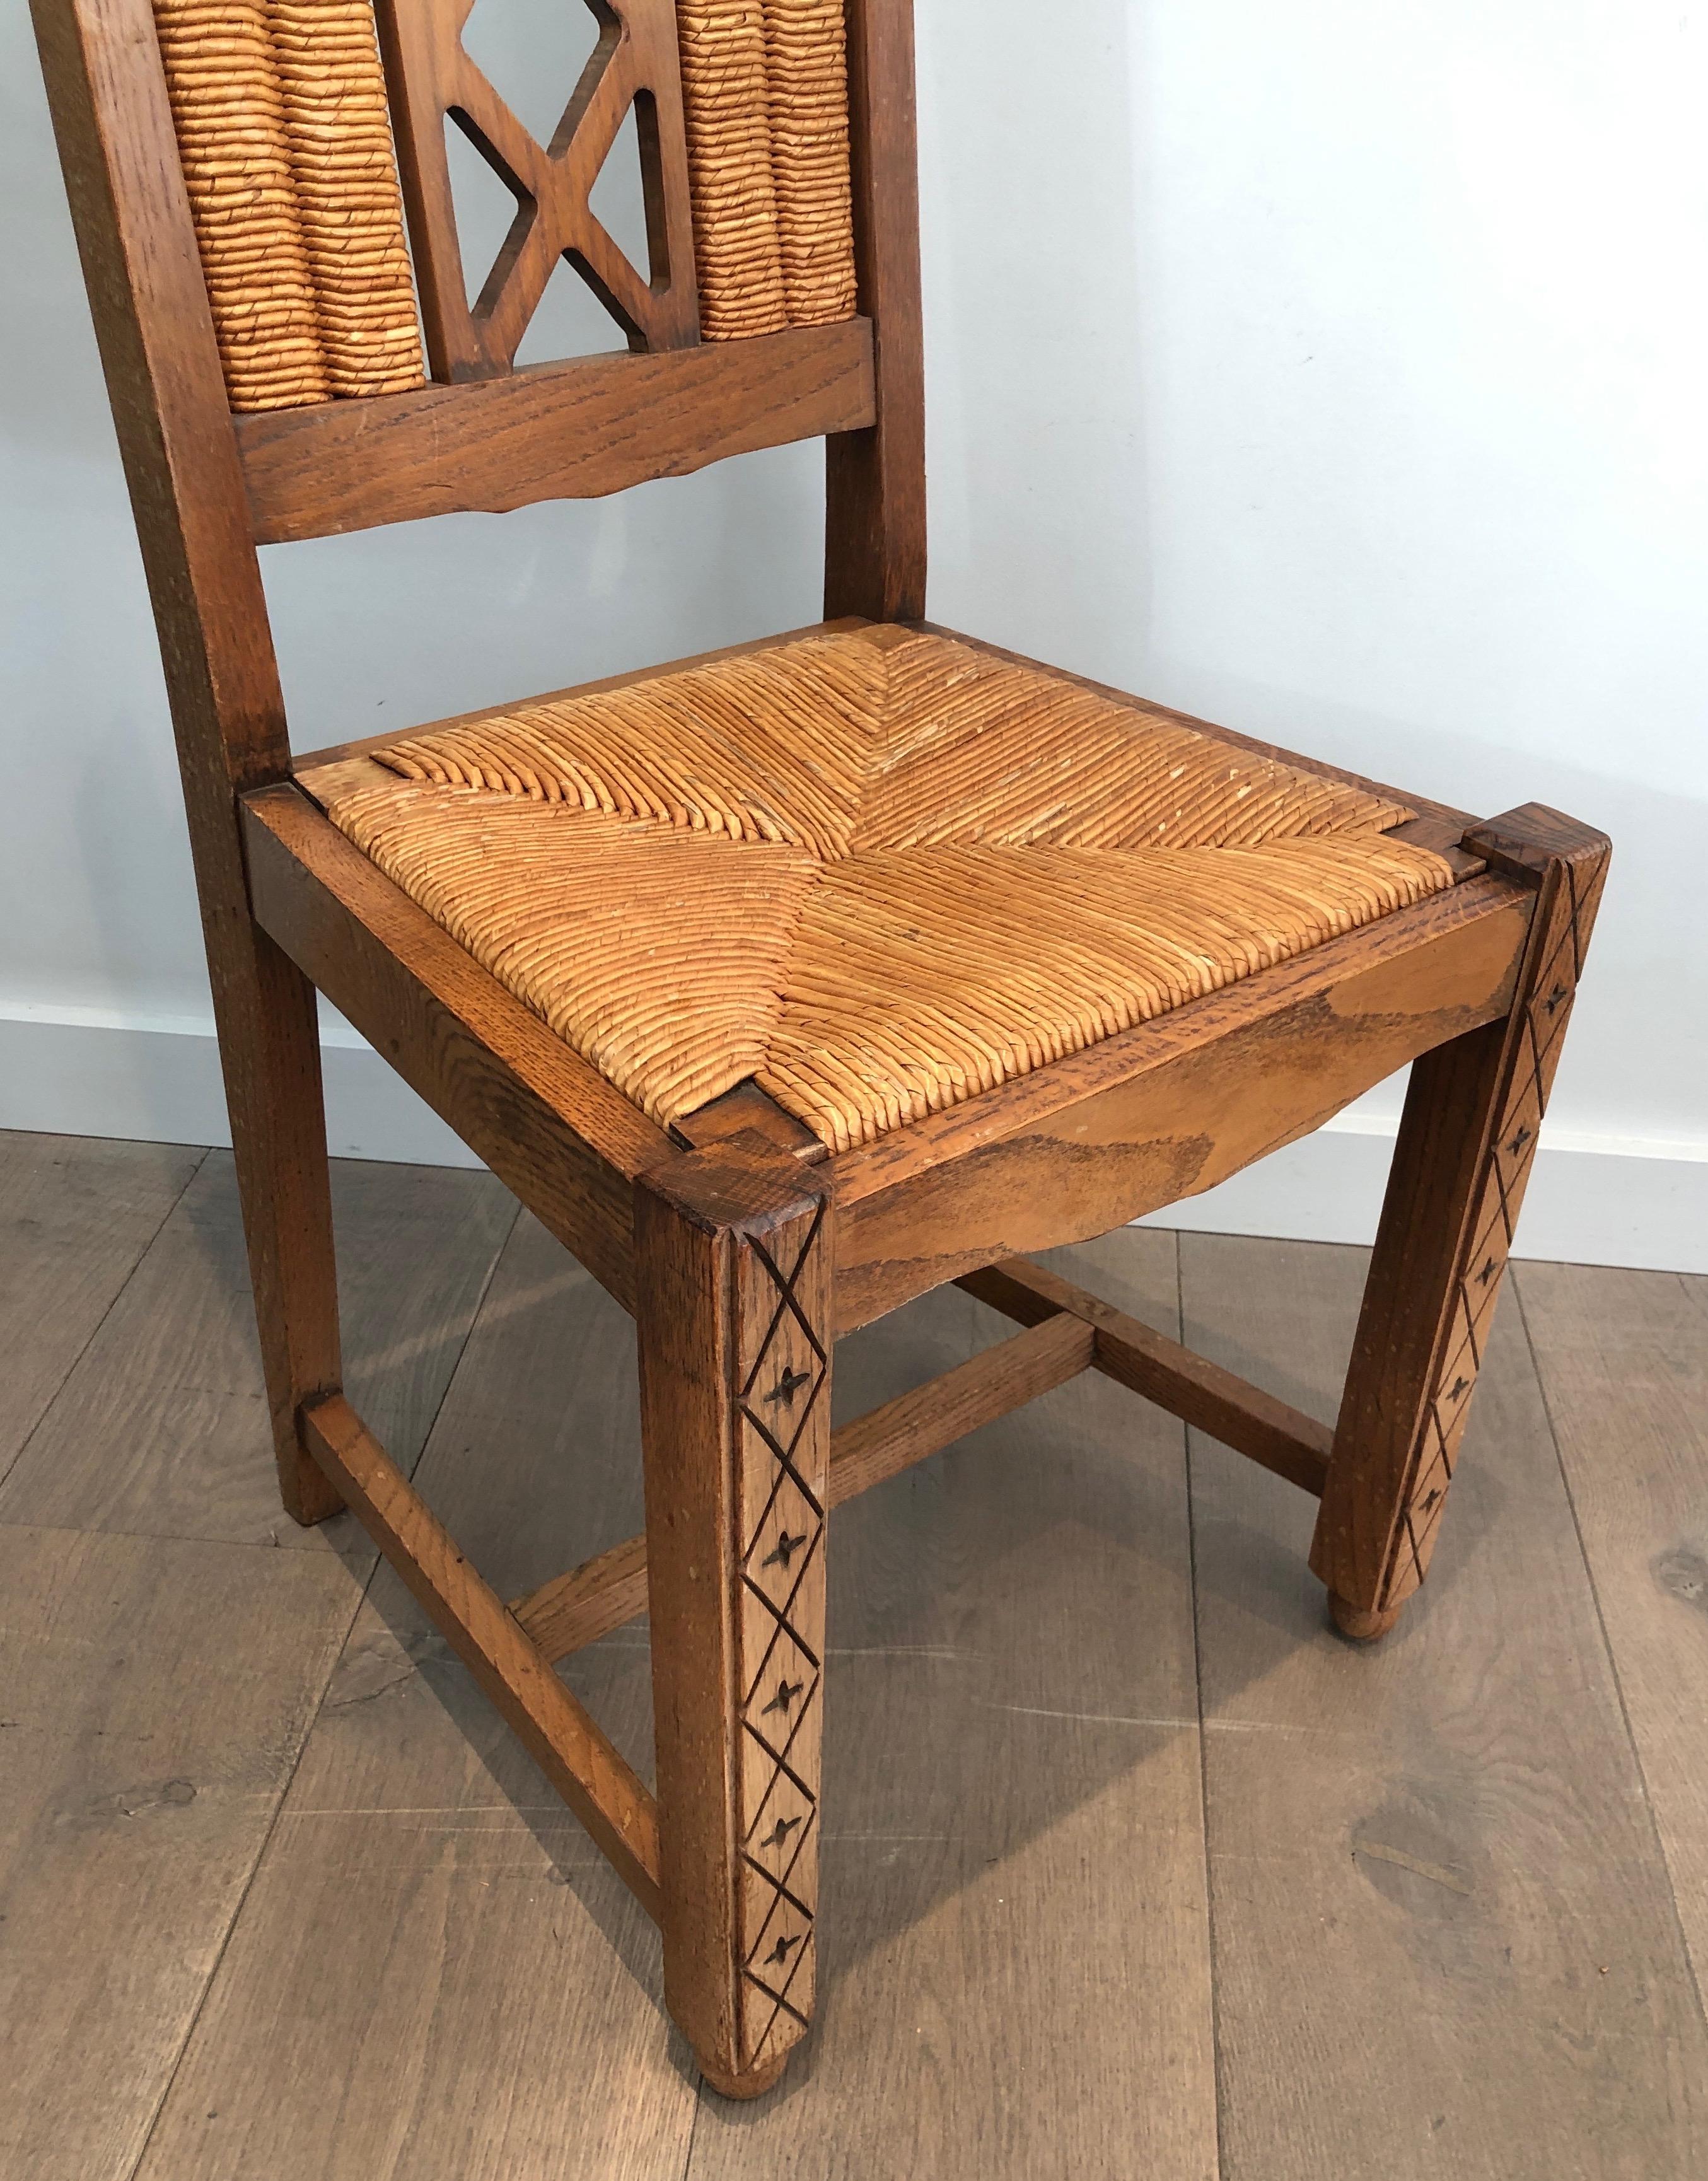 Set of 6 Brutalist Chairs Made of Ash and Straw, French Work, Circa 1950 For Sale 4